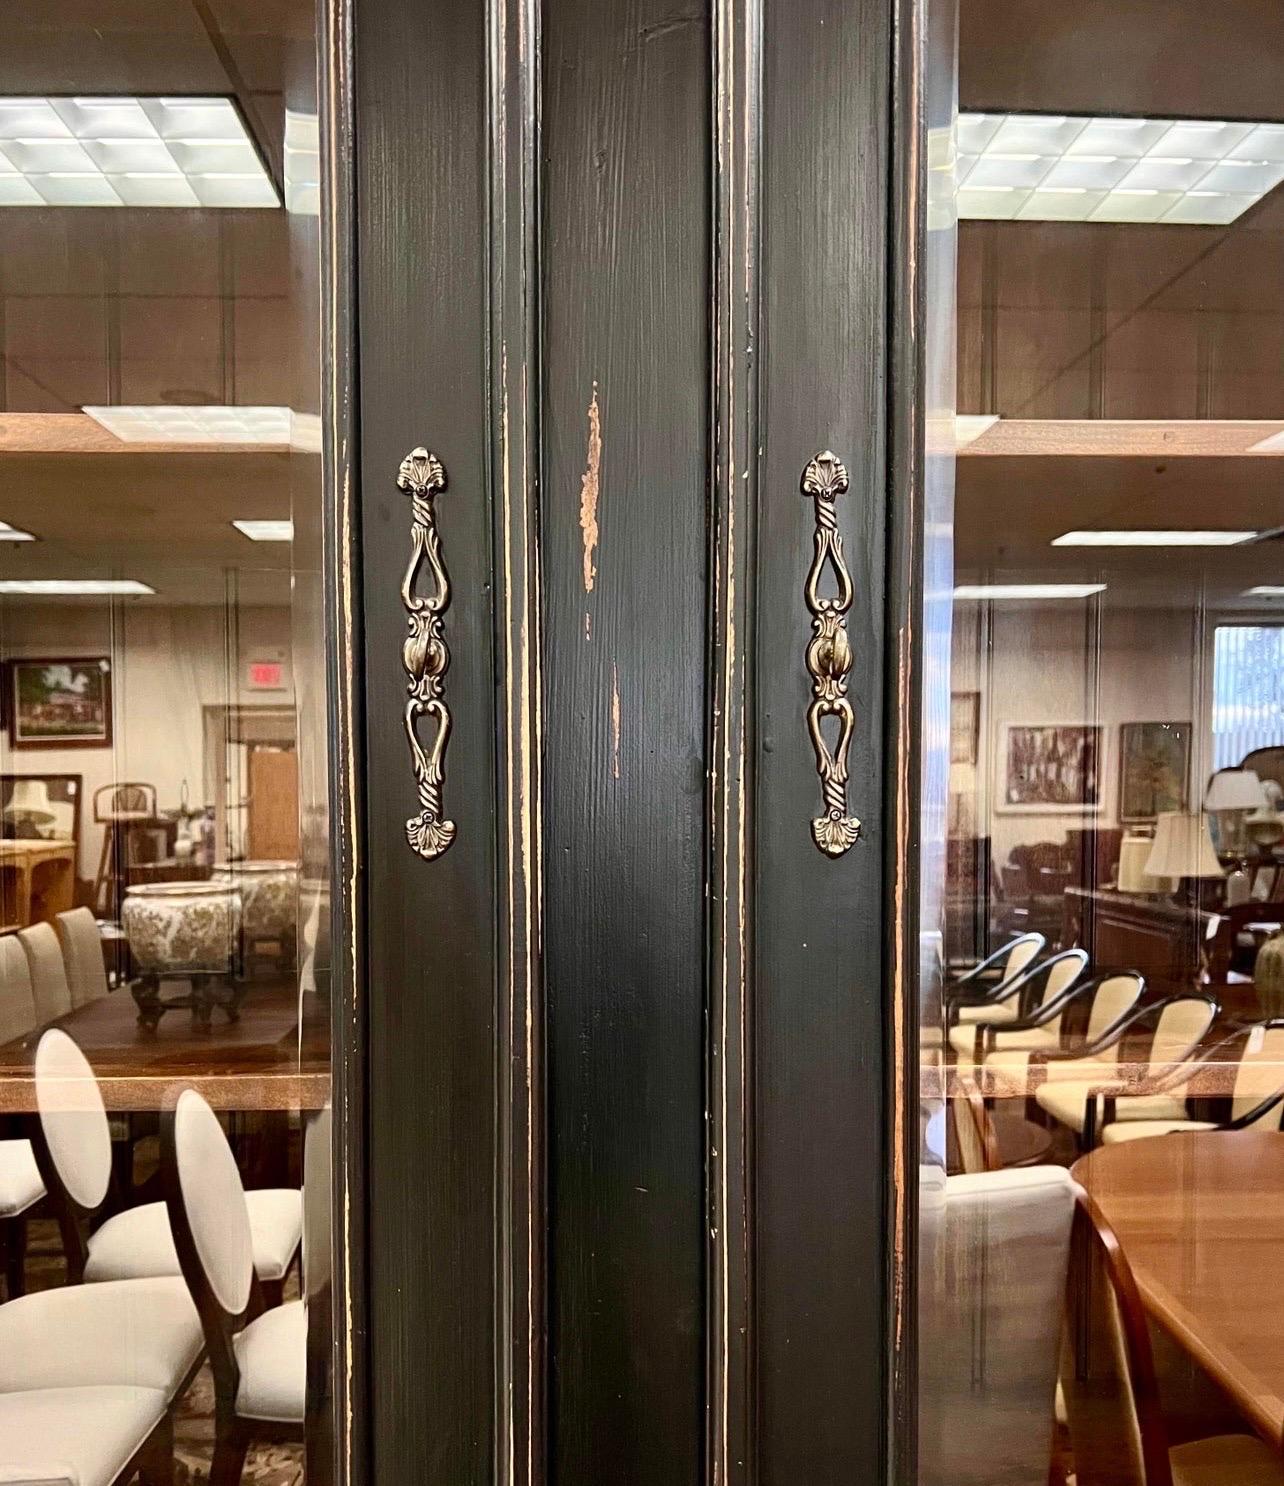 Large painted china cabinet in a distressed black finish and consisting of two parts, a top and a bottom for ease of movement.  The top has two front doors that open to shelves.  The bottom has two dovetailed drawers above two doors that open to